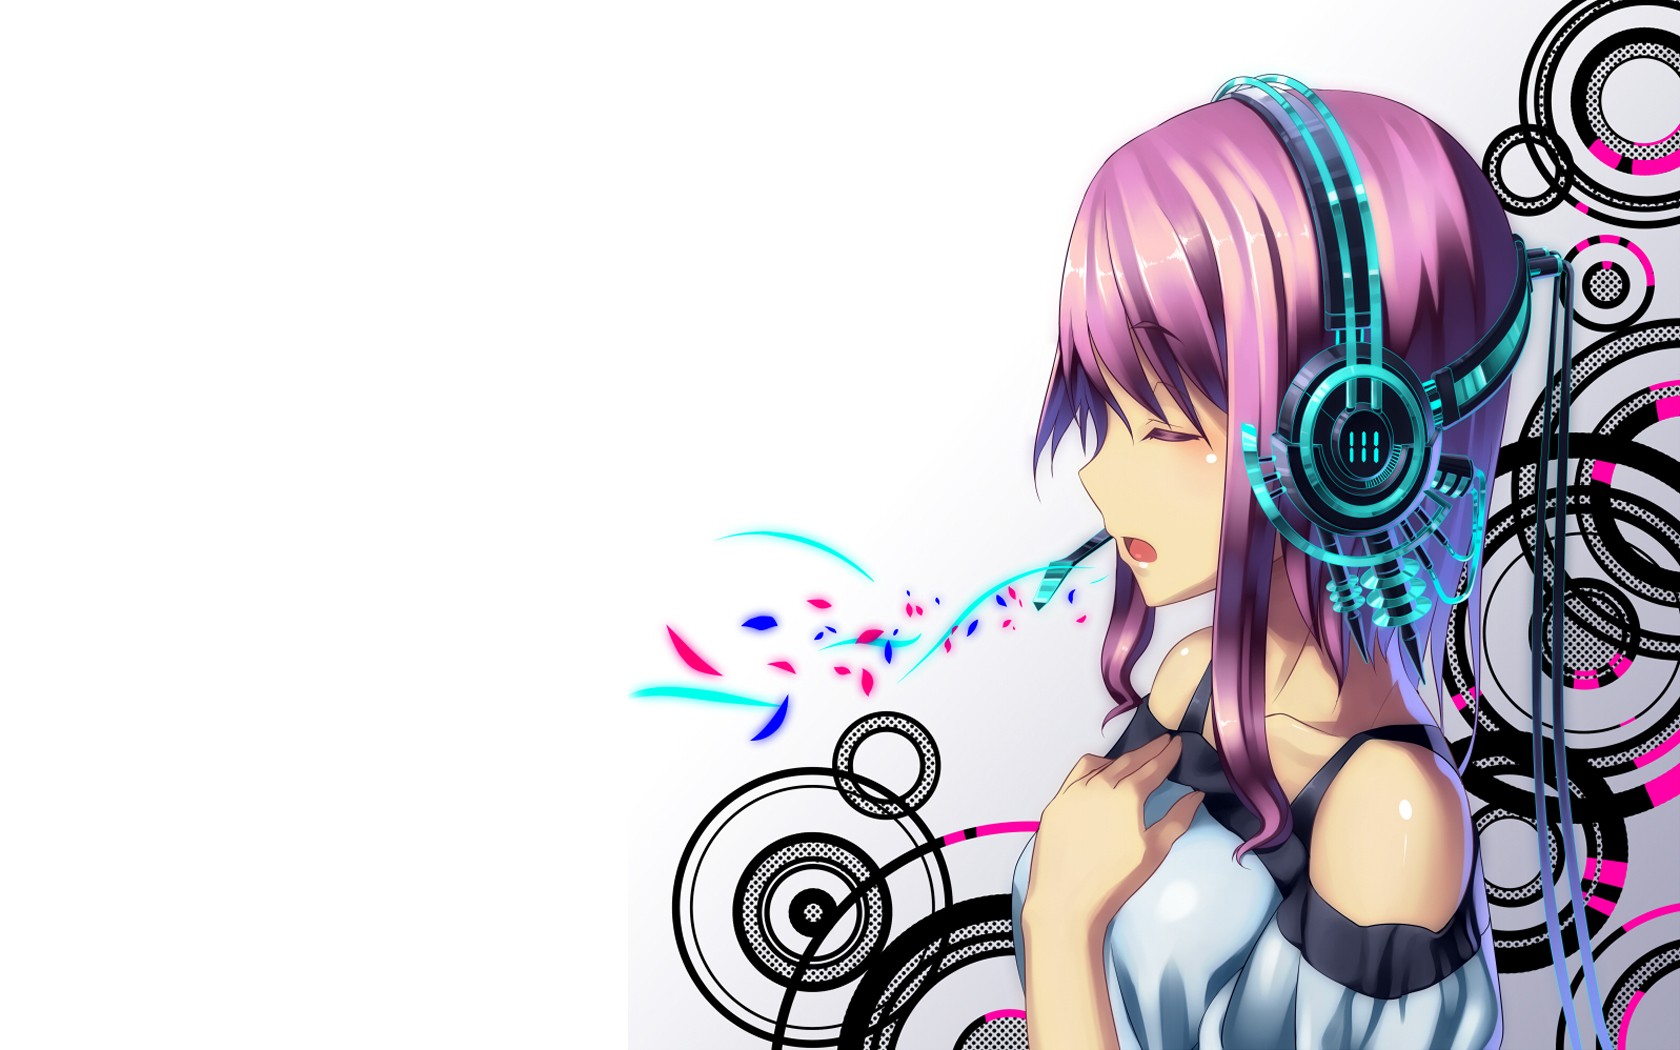 Headphones - /w/ - Anime/Wallpapers - 4archive.org